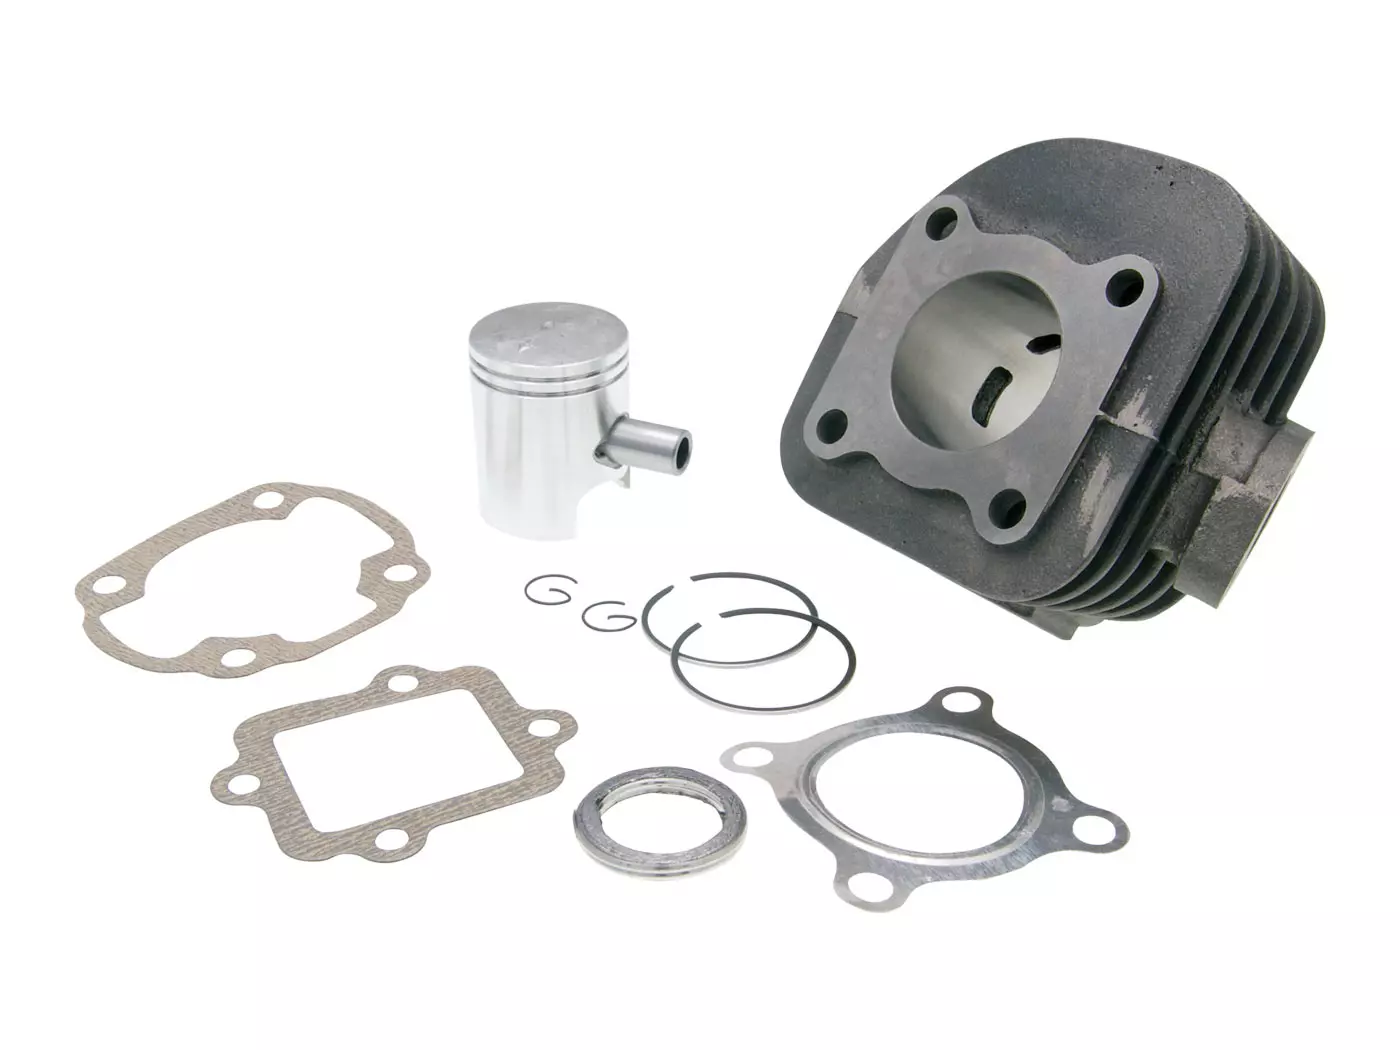 Cylinder Kit 50cc For CPI, Keeway Euro 2 Straight, 12mm = IP18306